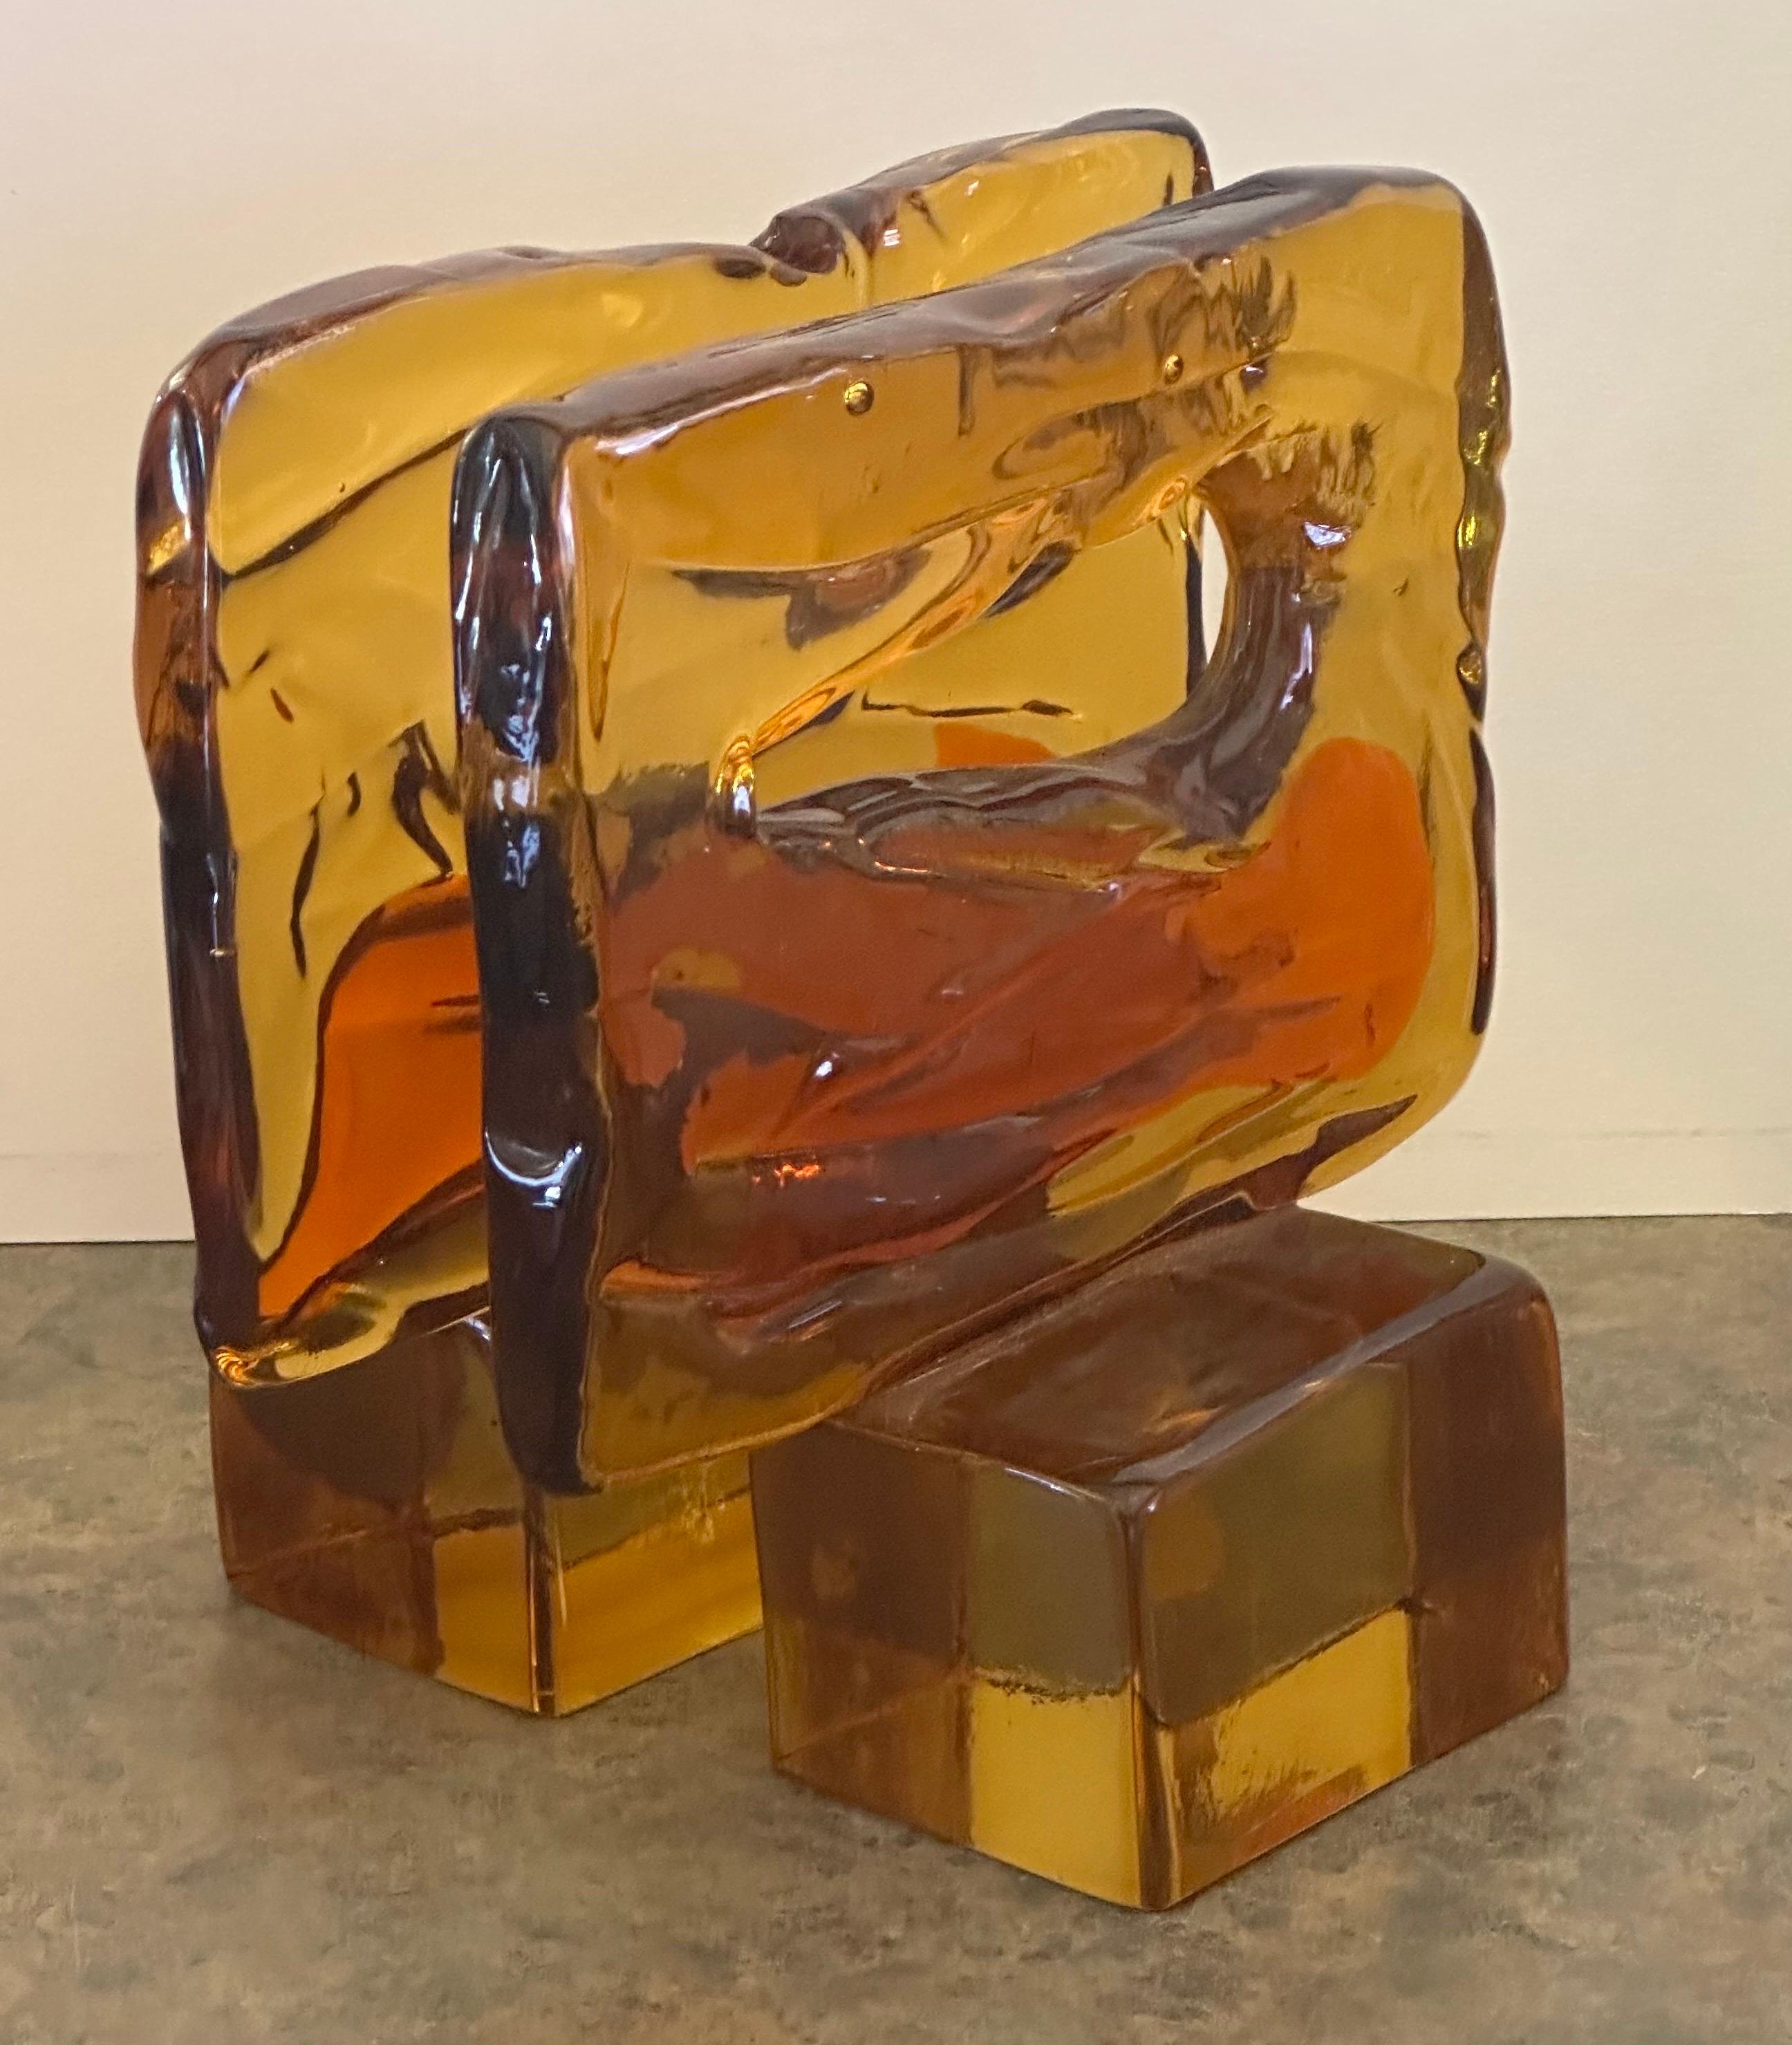 Pair of Large Abstract Sommerso Bookends by Luciano Gaspari for Murano Glass For Sale 4